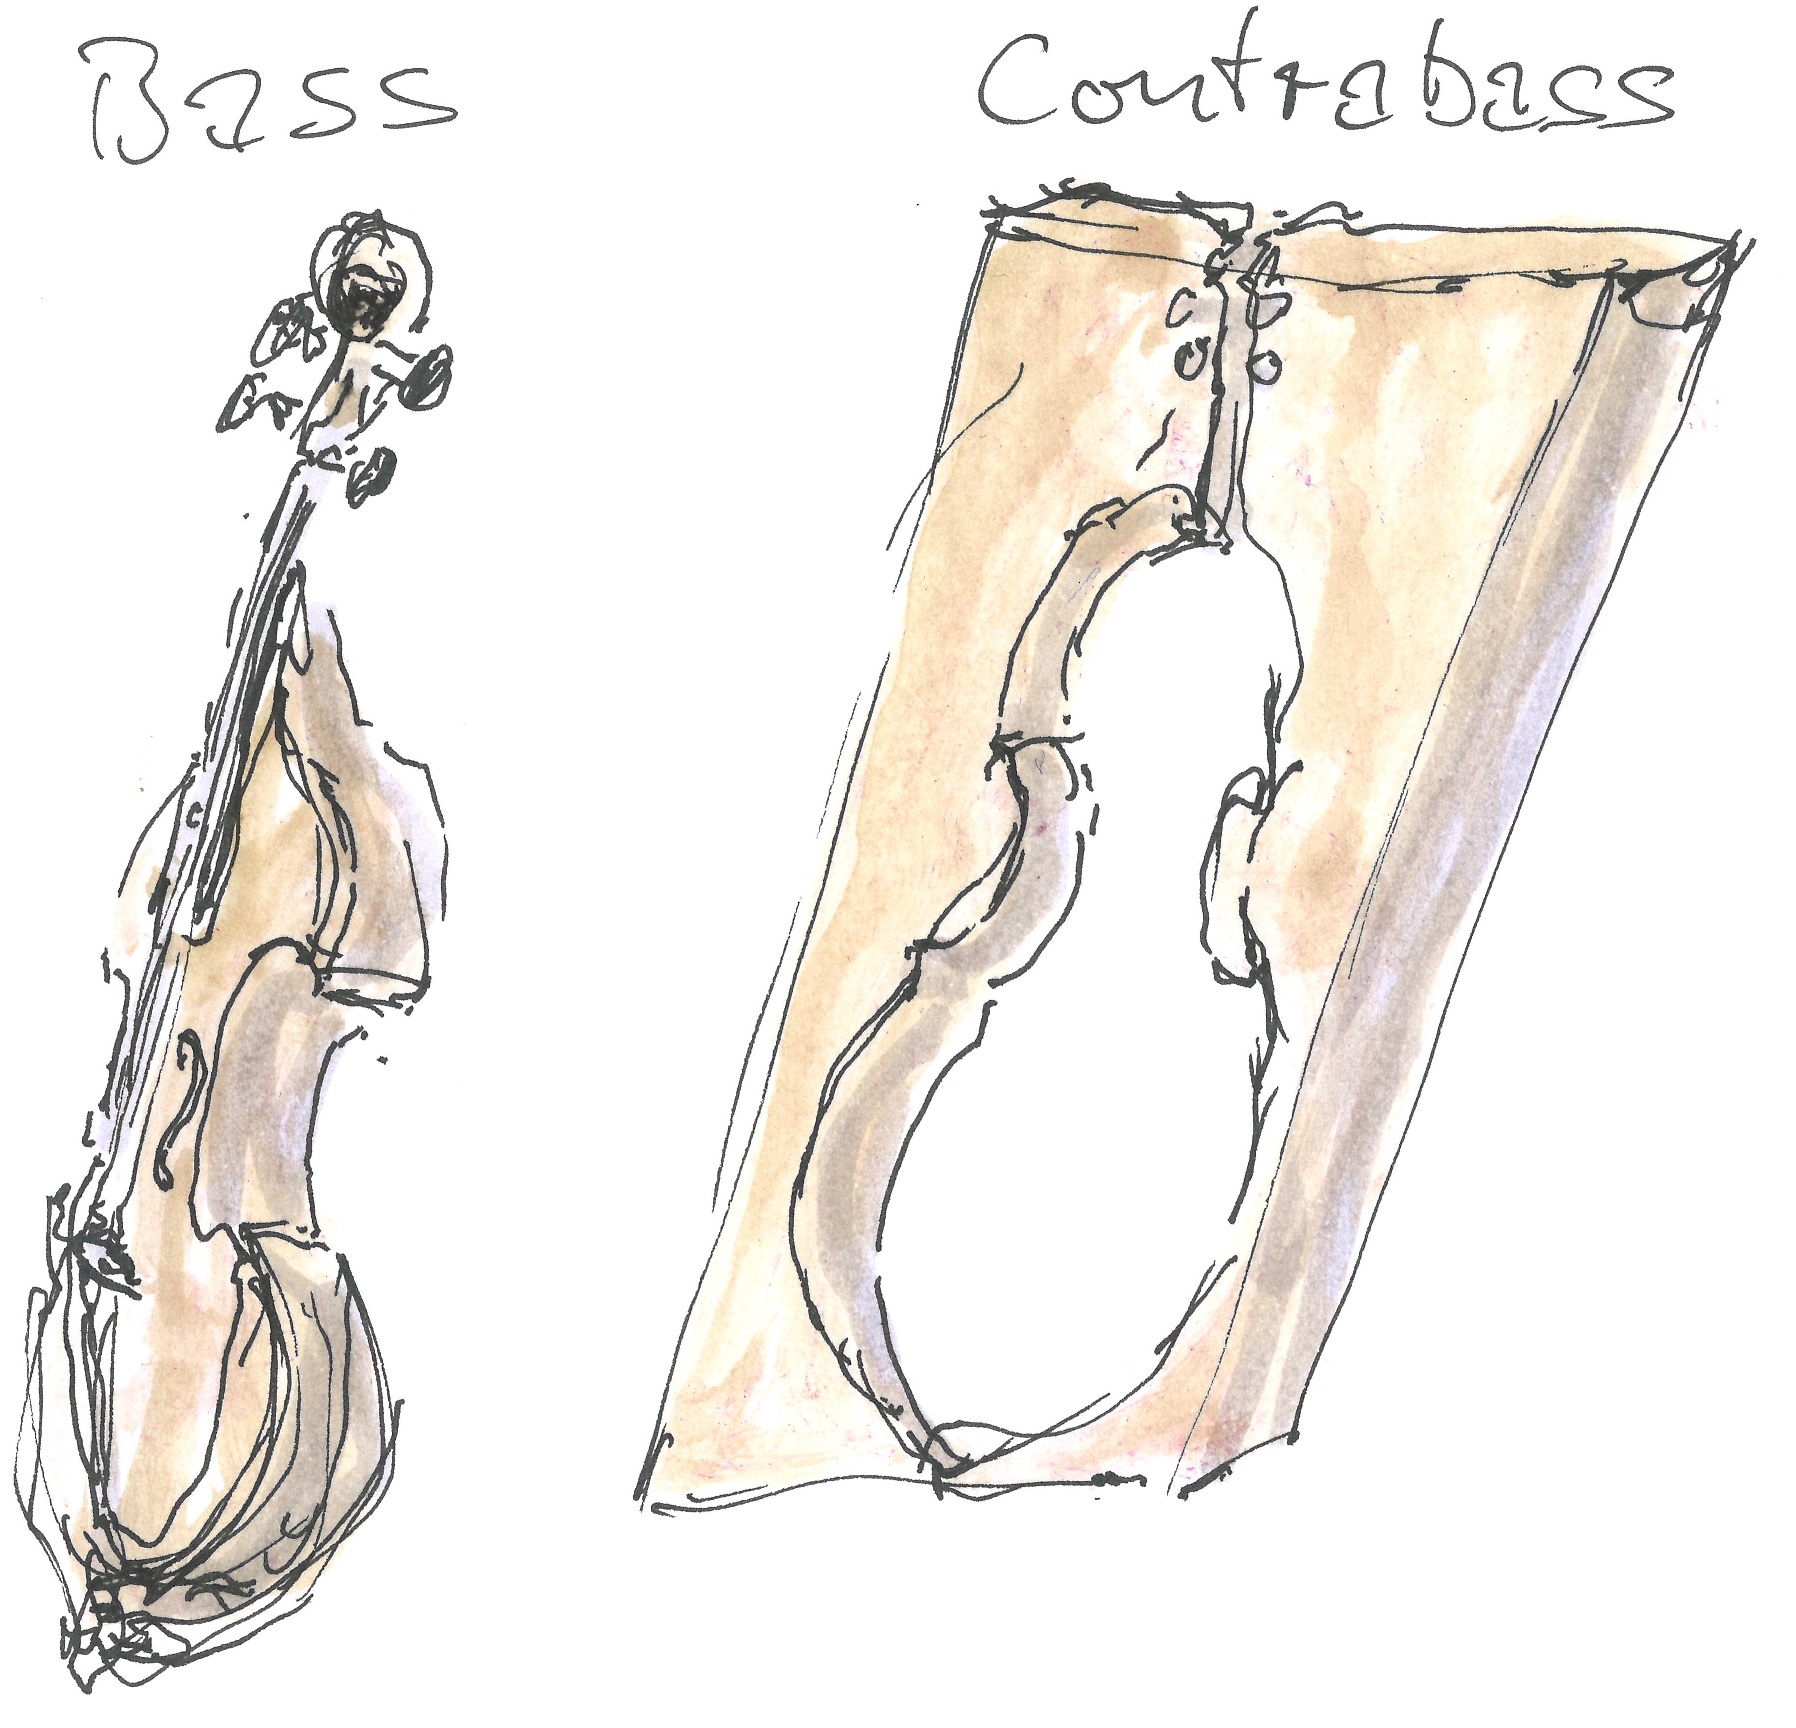 Bass and contrabass